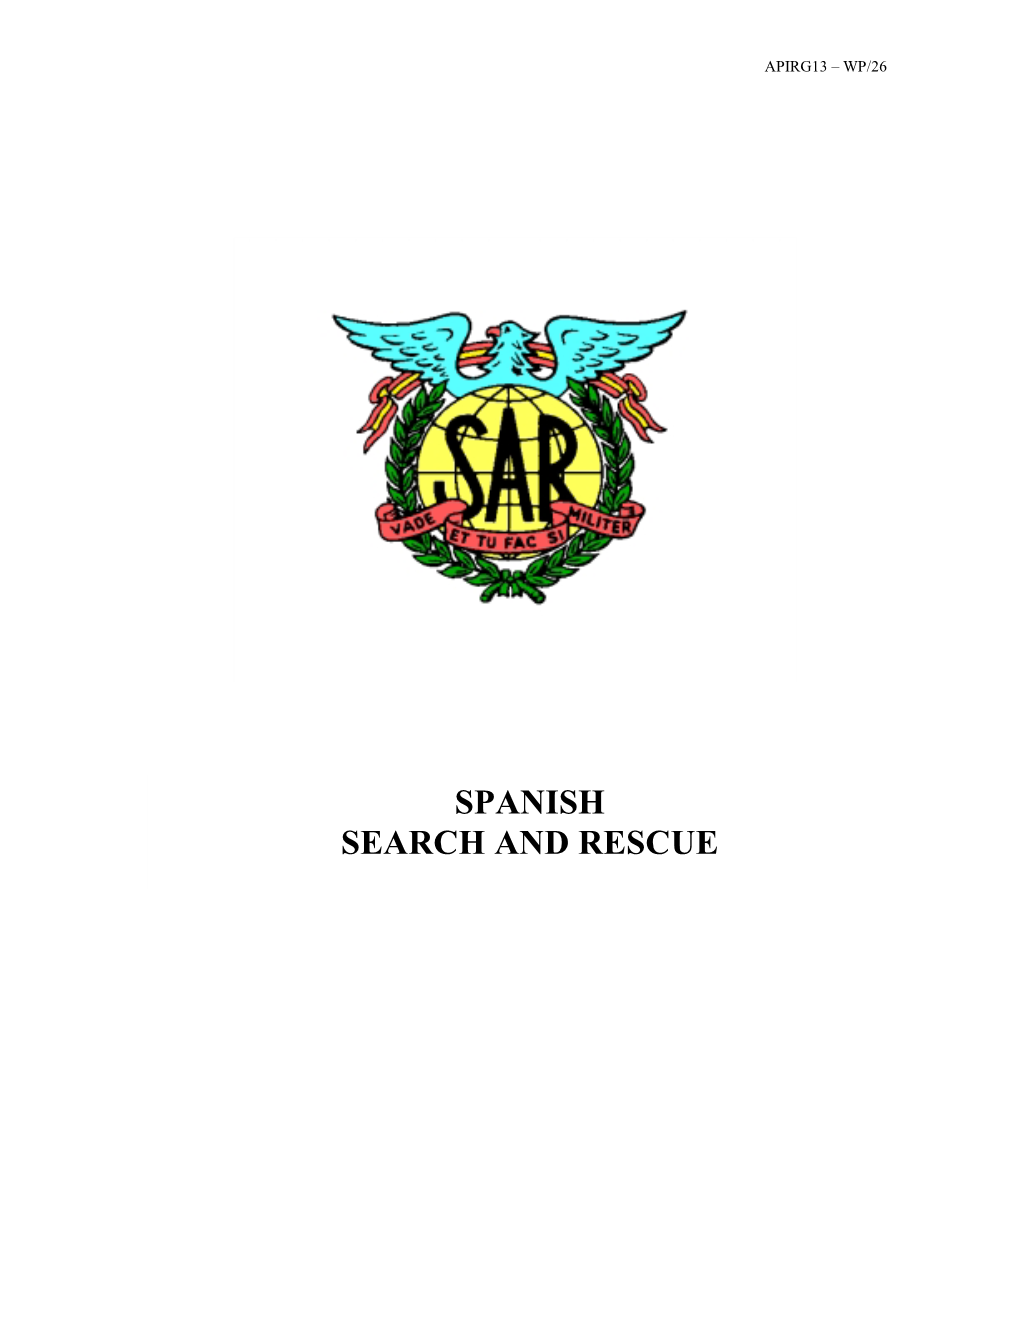 Spanish Search and Rescue Apirg13 – Wp/26